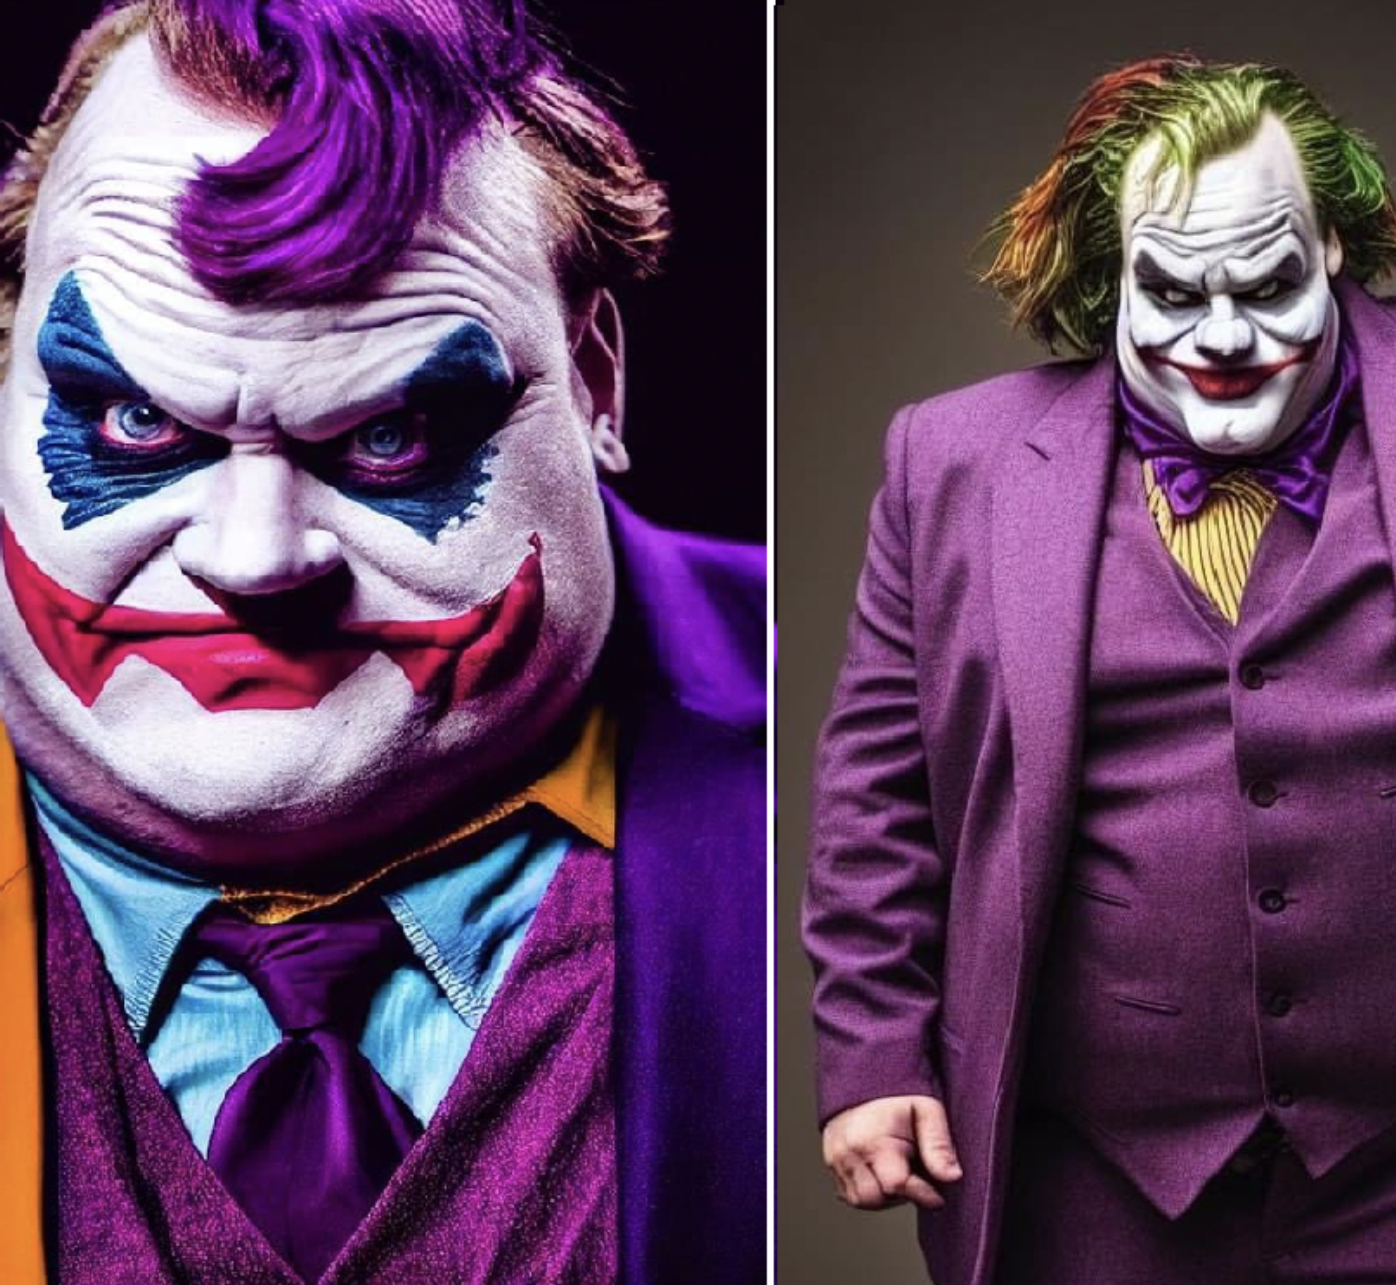 An AI rendering of what Chris Farley would have looked like as the Joker.